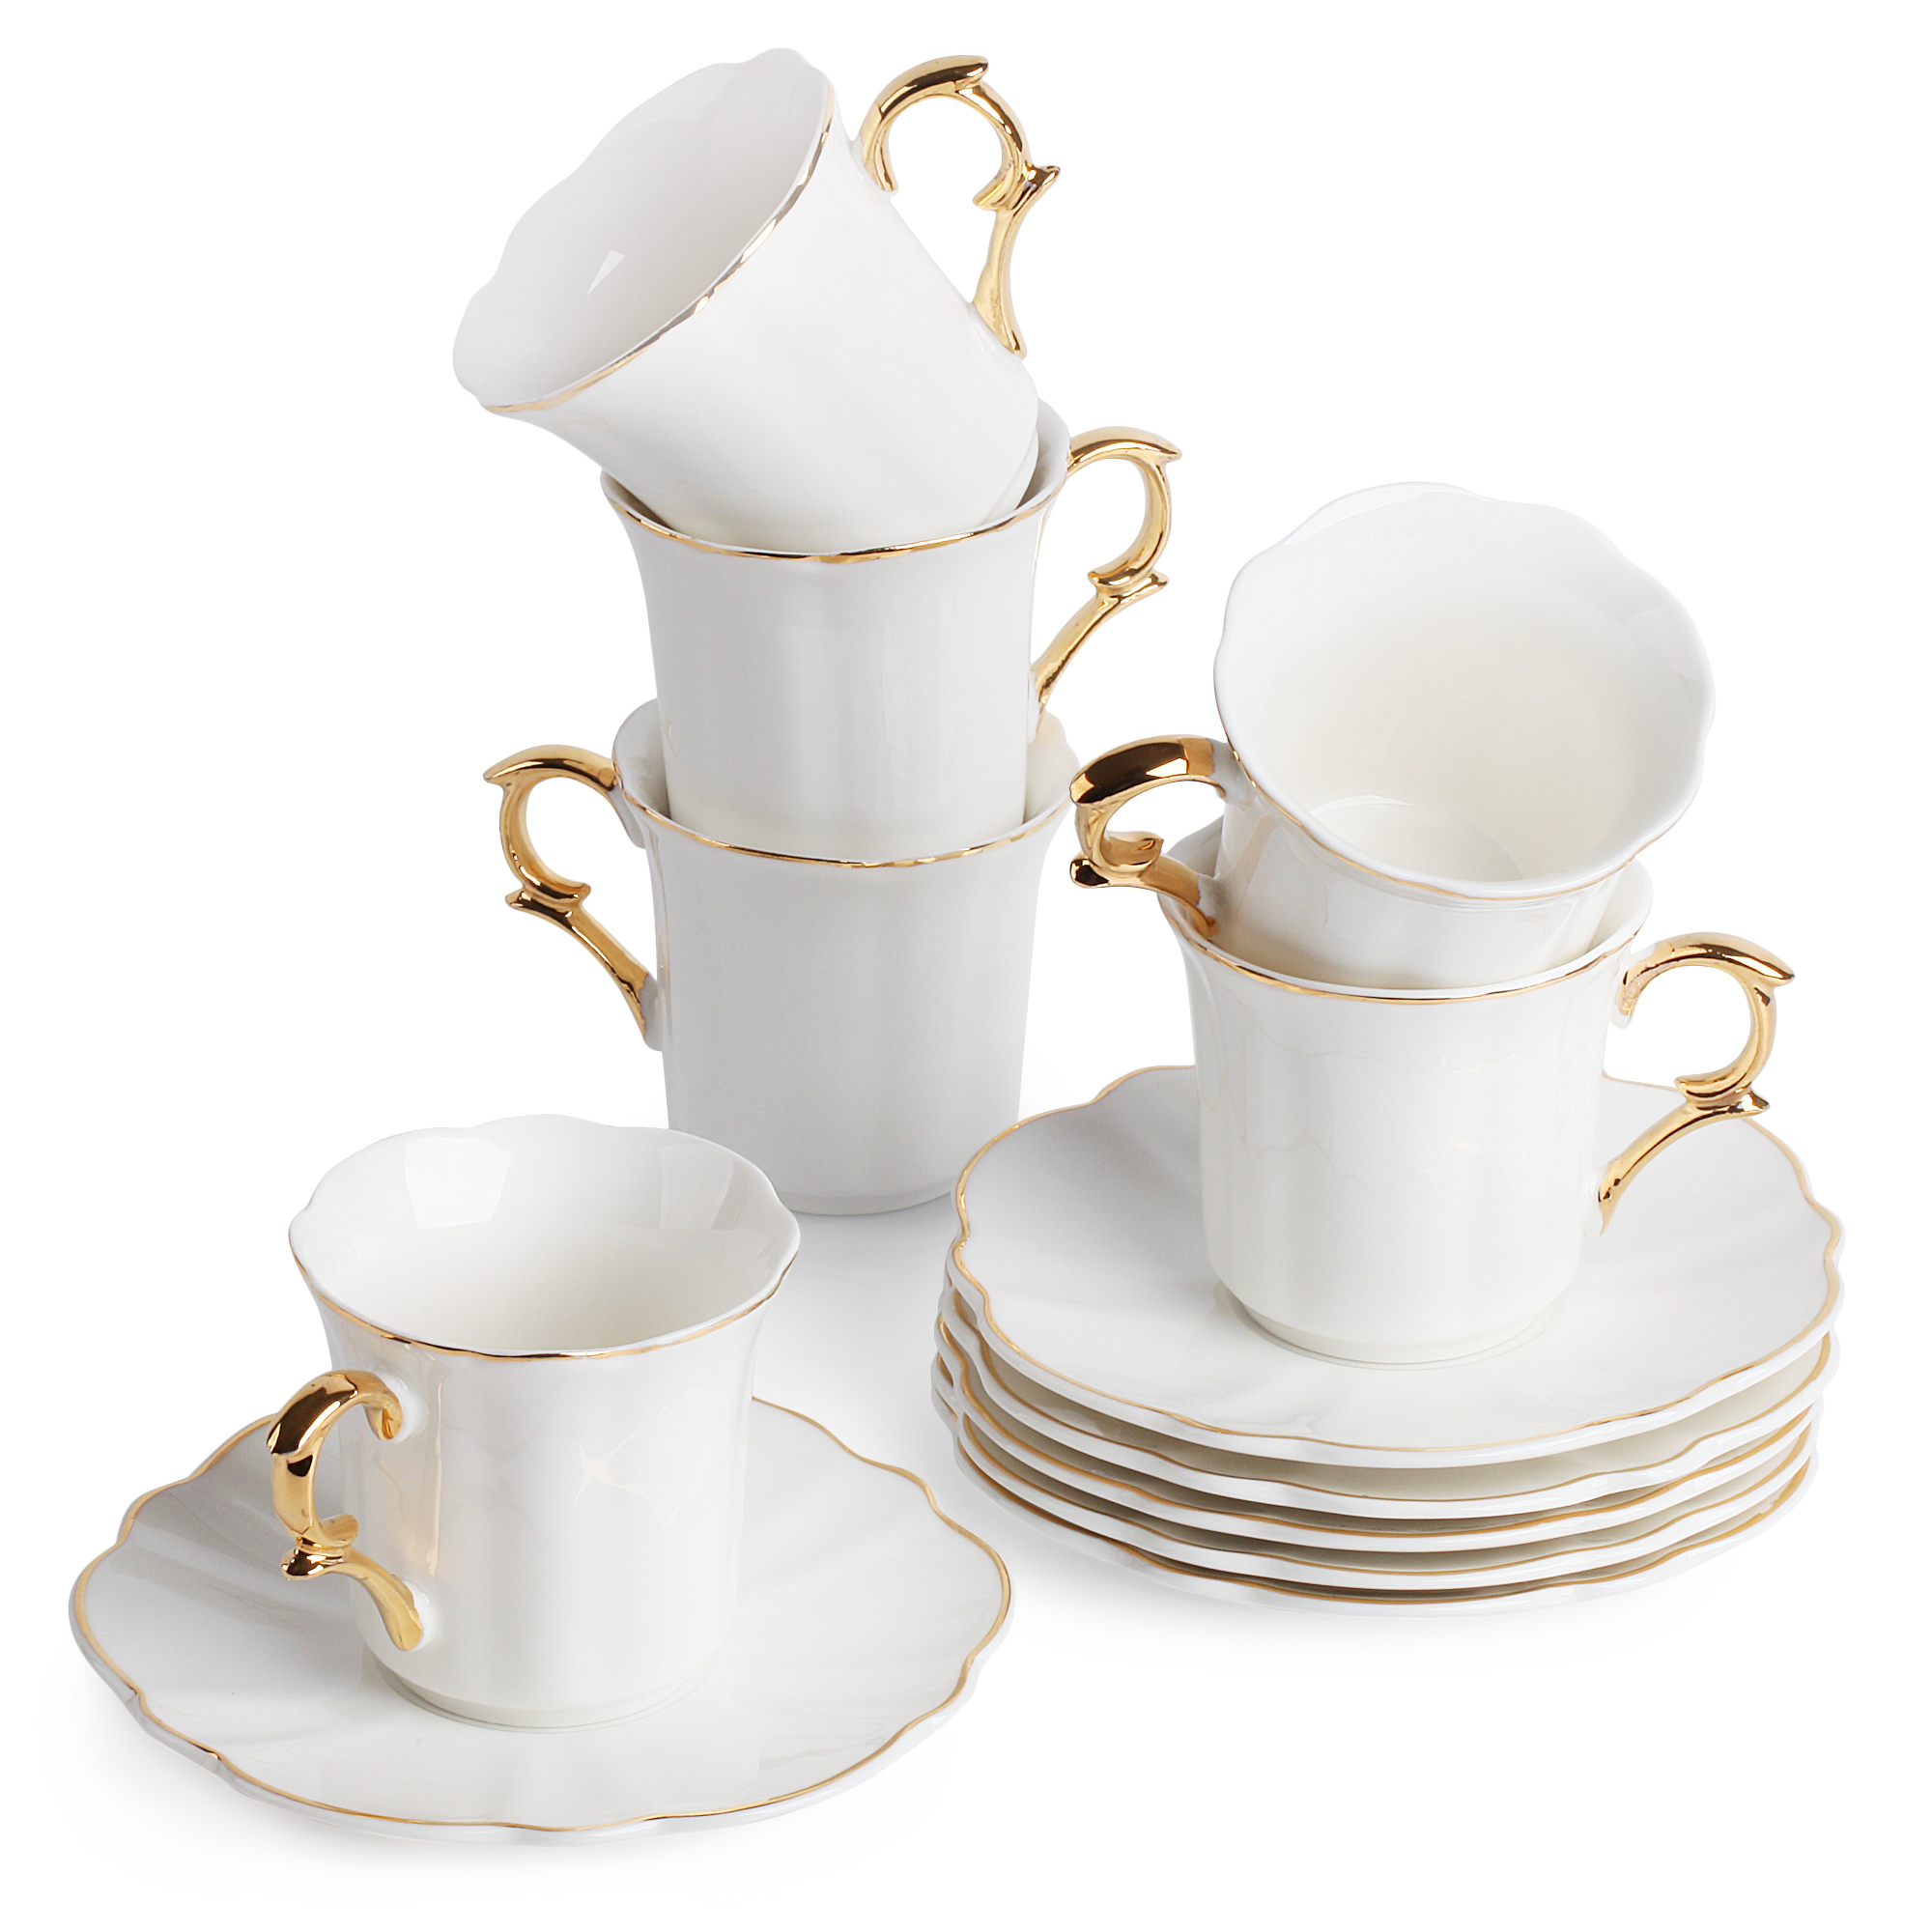 6oz with Gold Trim Espresso Coffee Cup Set for Specialty Coffee Drinks Latte Hedume 6 Pack Espresso Cups with Saucers and Spoons Cafe Mocha and Tea